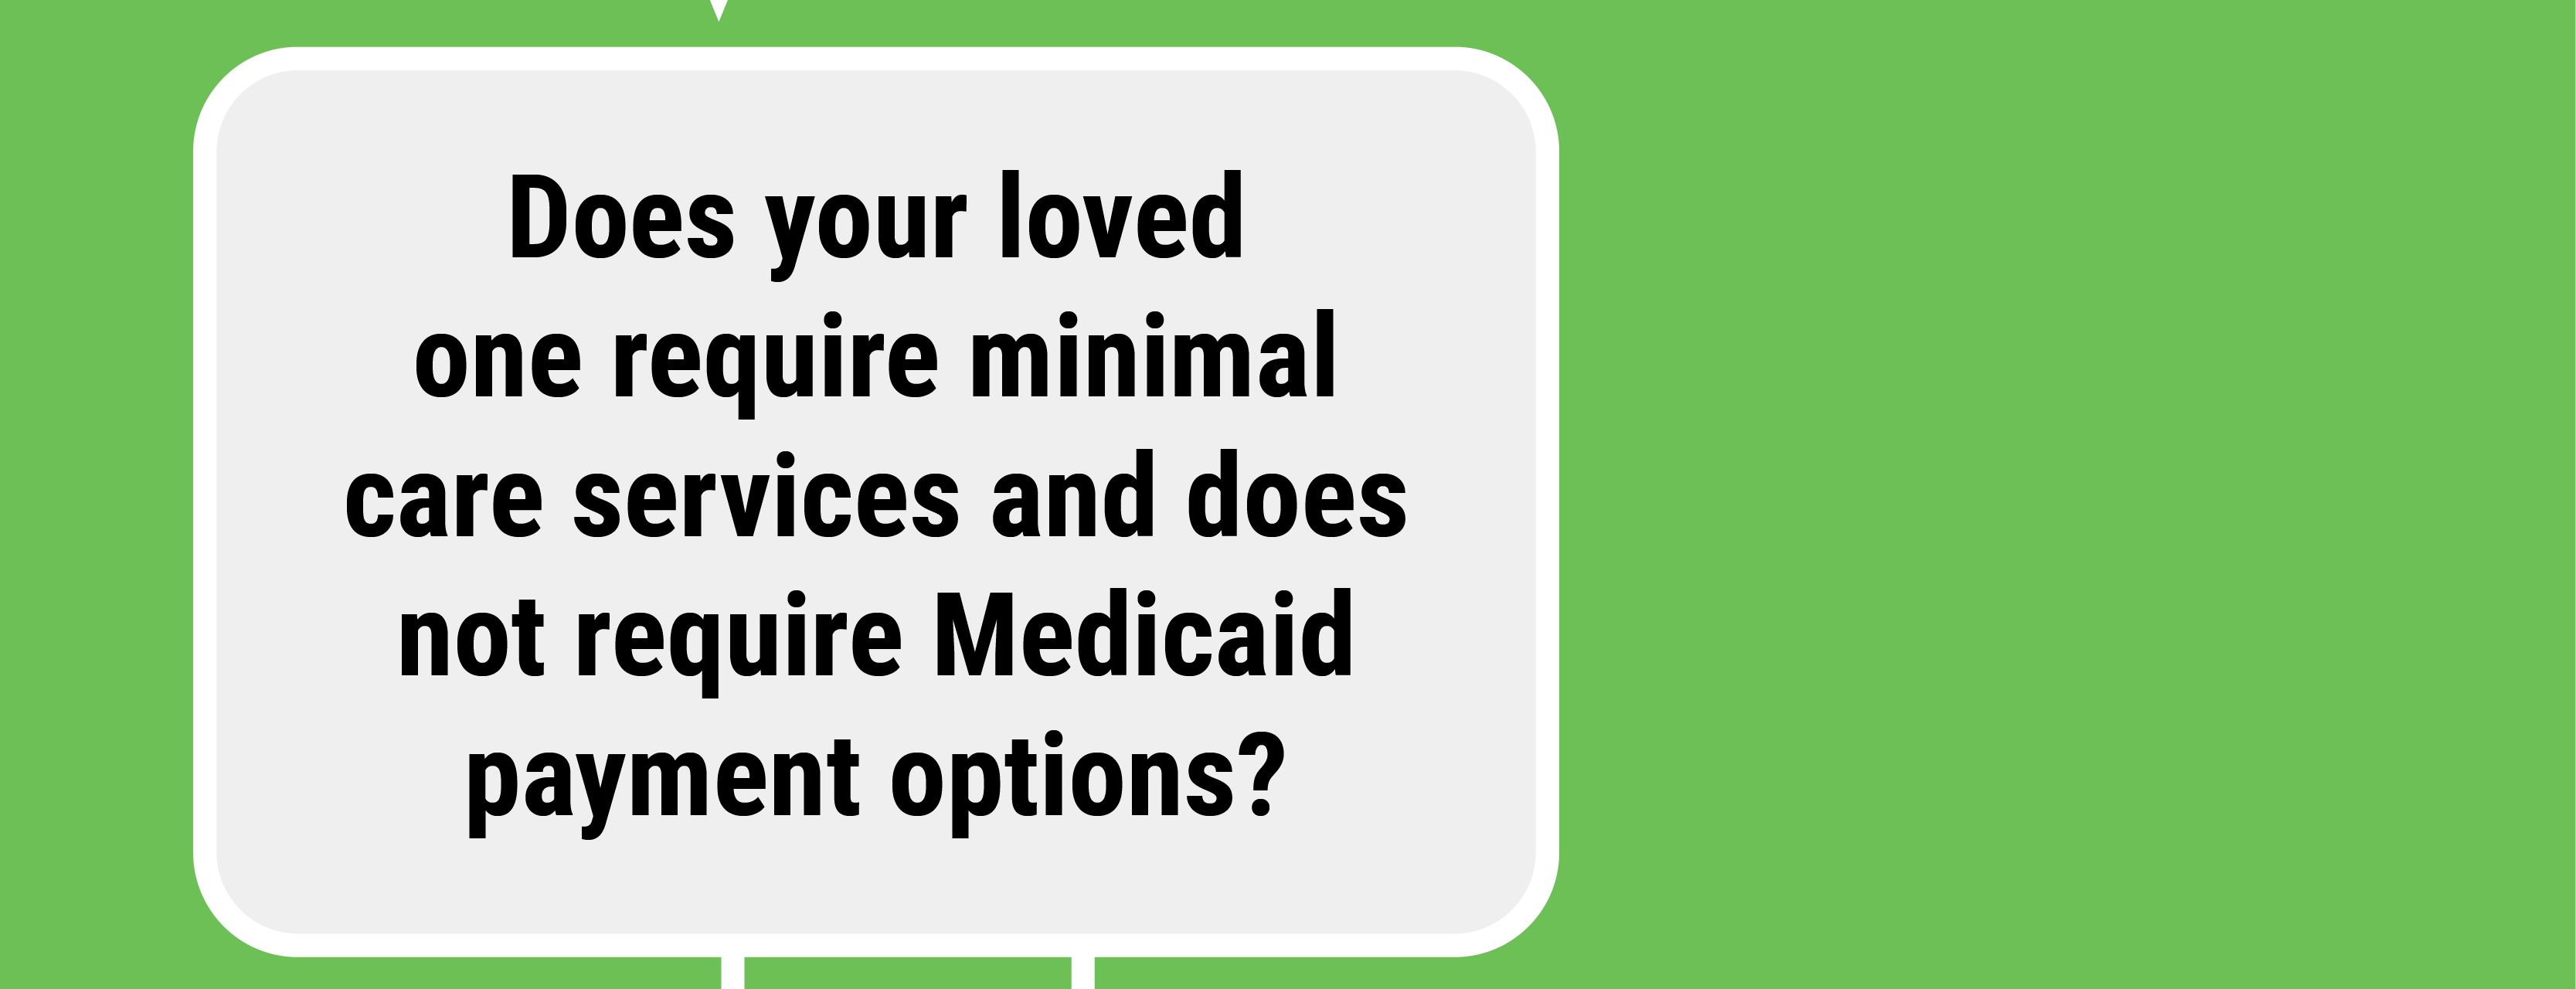 Does your loved one require minimal care services and does not require Medicaid payment options?